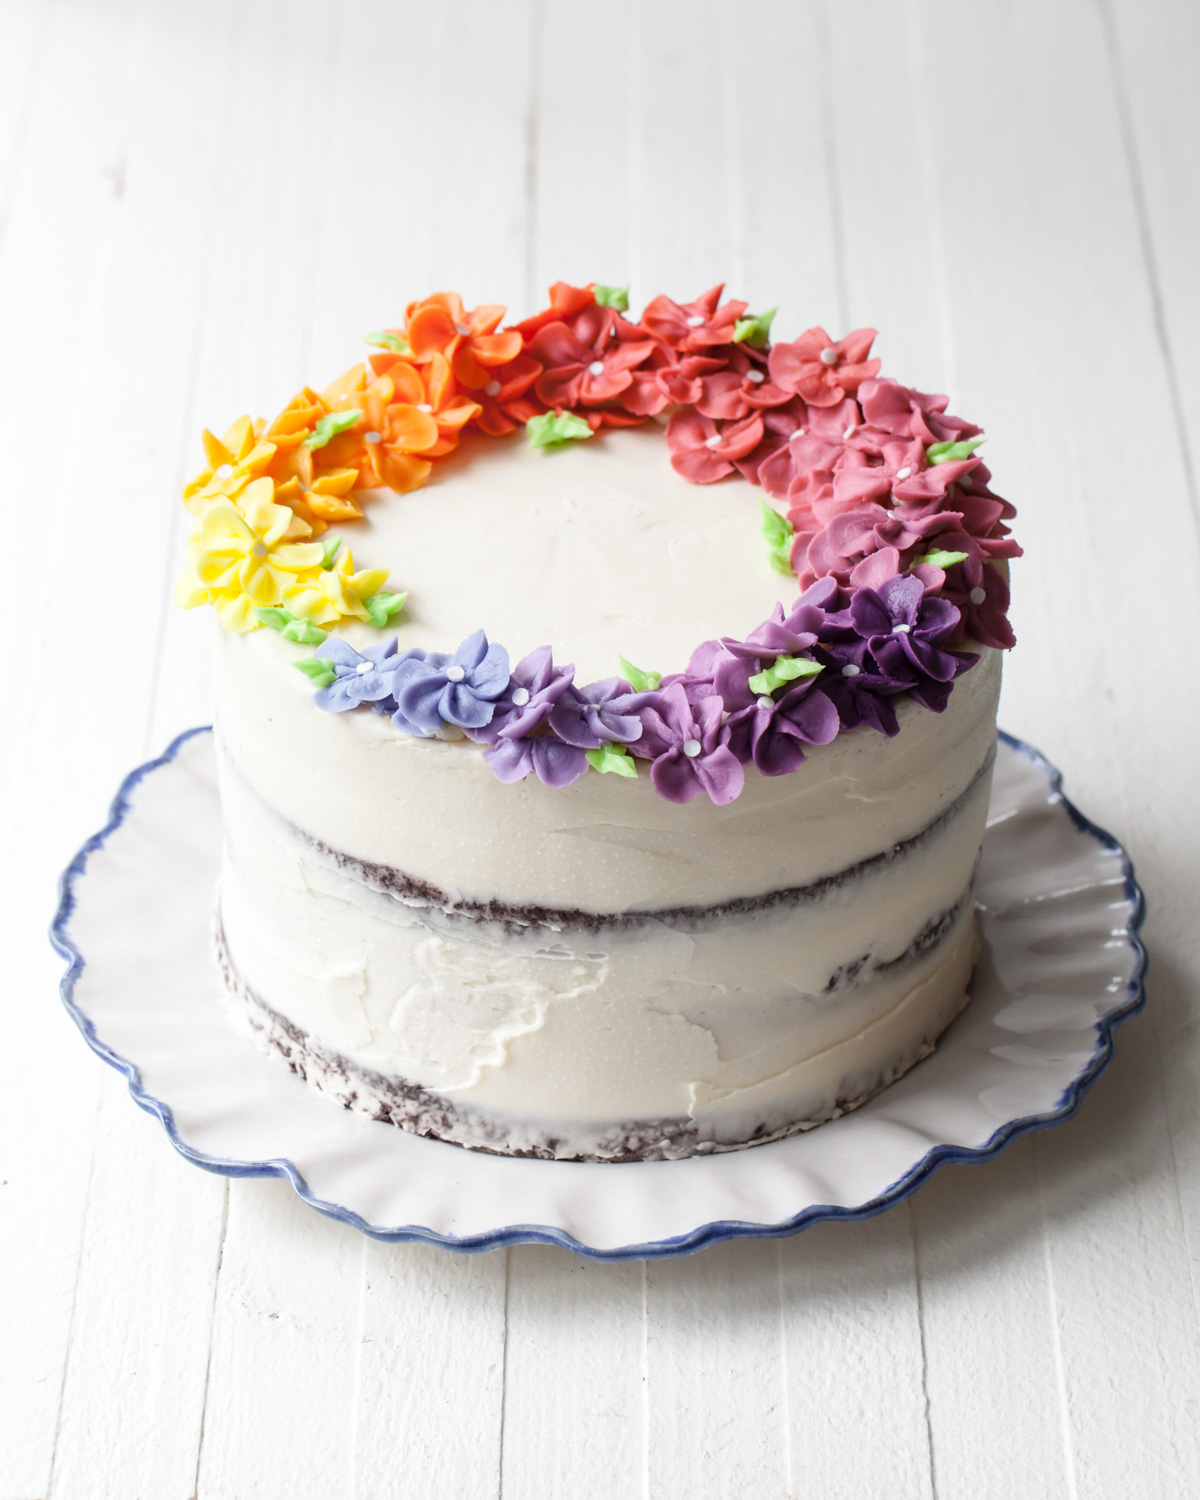 Rainbow flower cake with piped flowers around the top